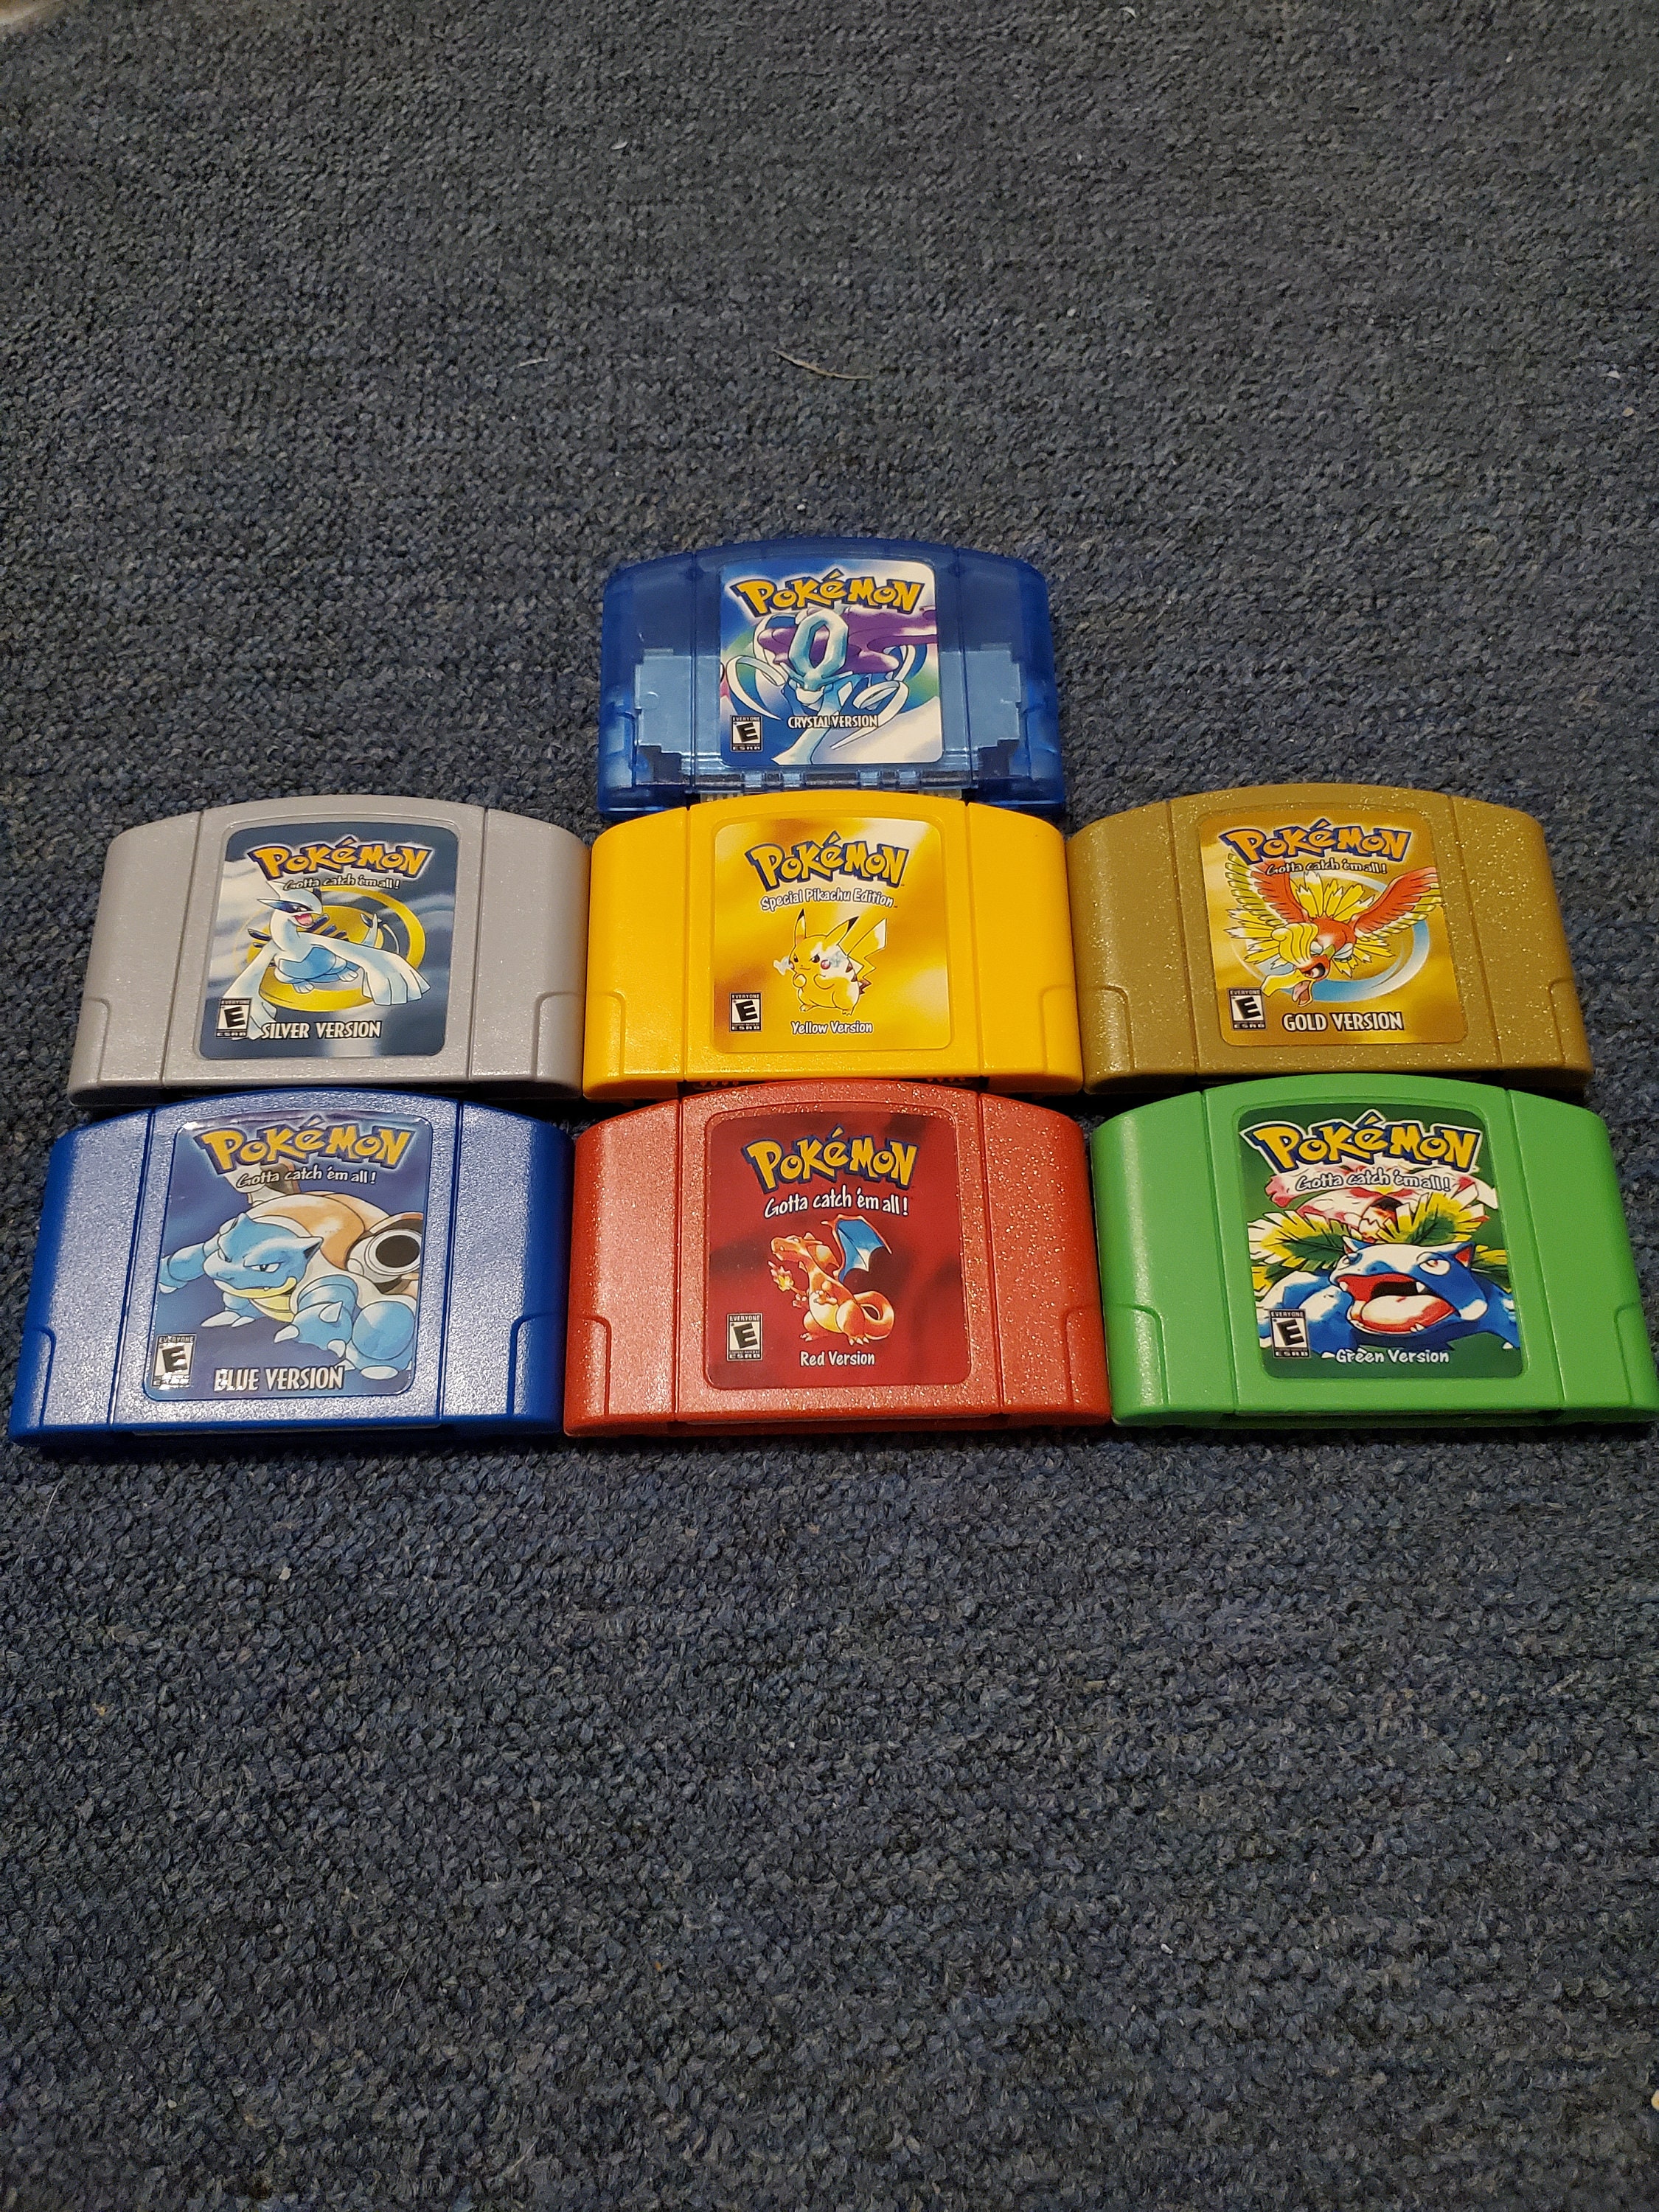 Buy Pokemon Games for Nintendo 64 Red, Blue, Crystal, Silver